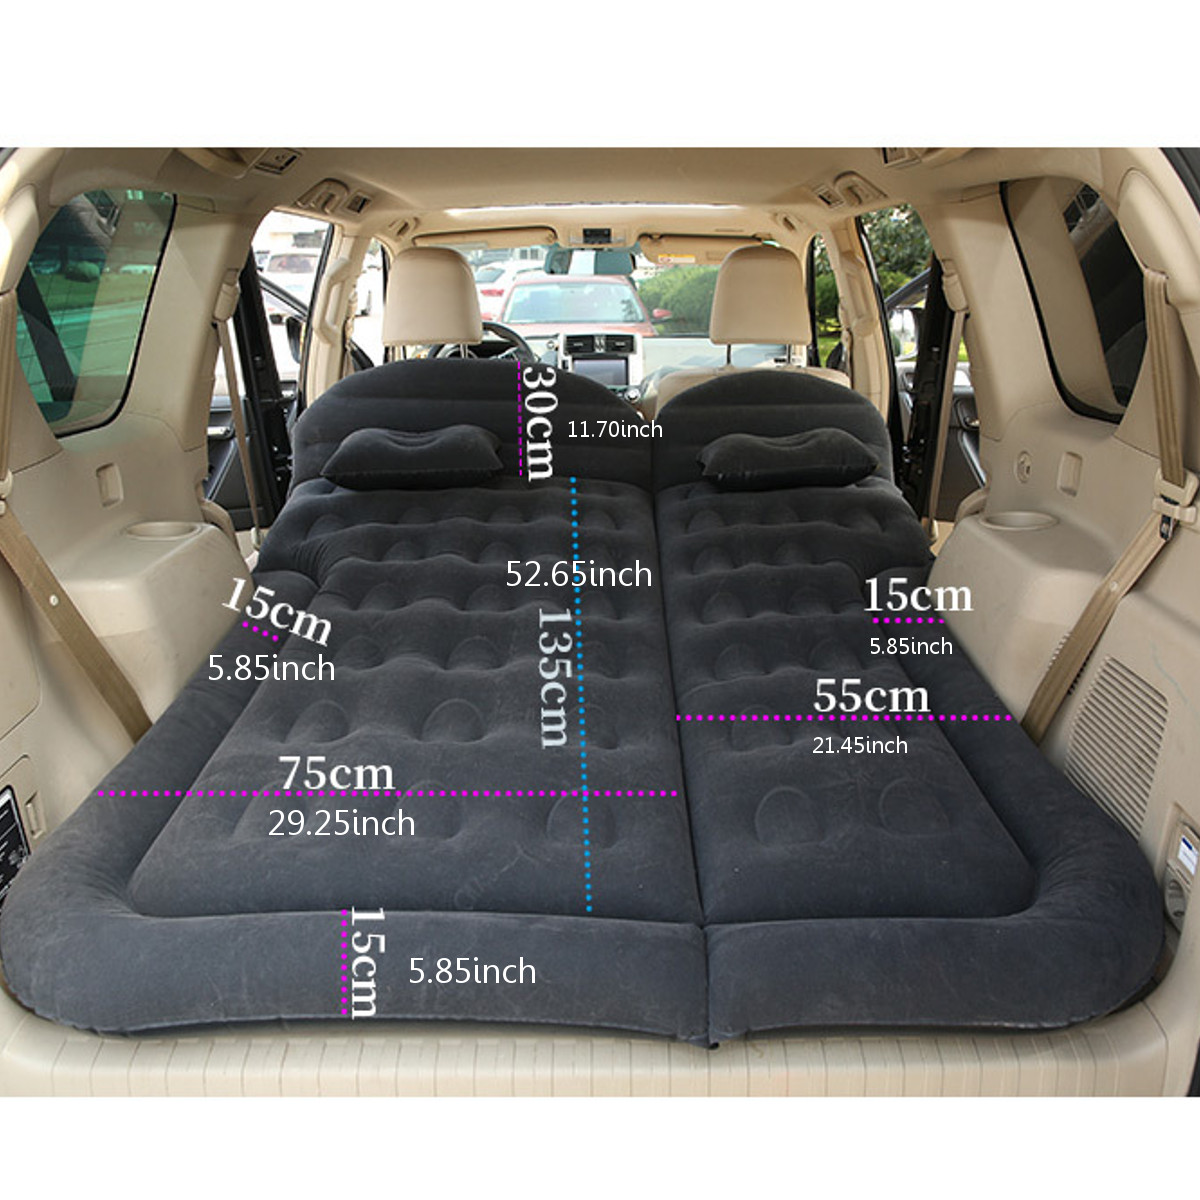 180x130cm-Multifunctional-Inflatable-Car-Air-Mattress-Durable-Back-Seat-Cover-Travel-Bed-Moisture-pr-1888970-7